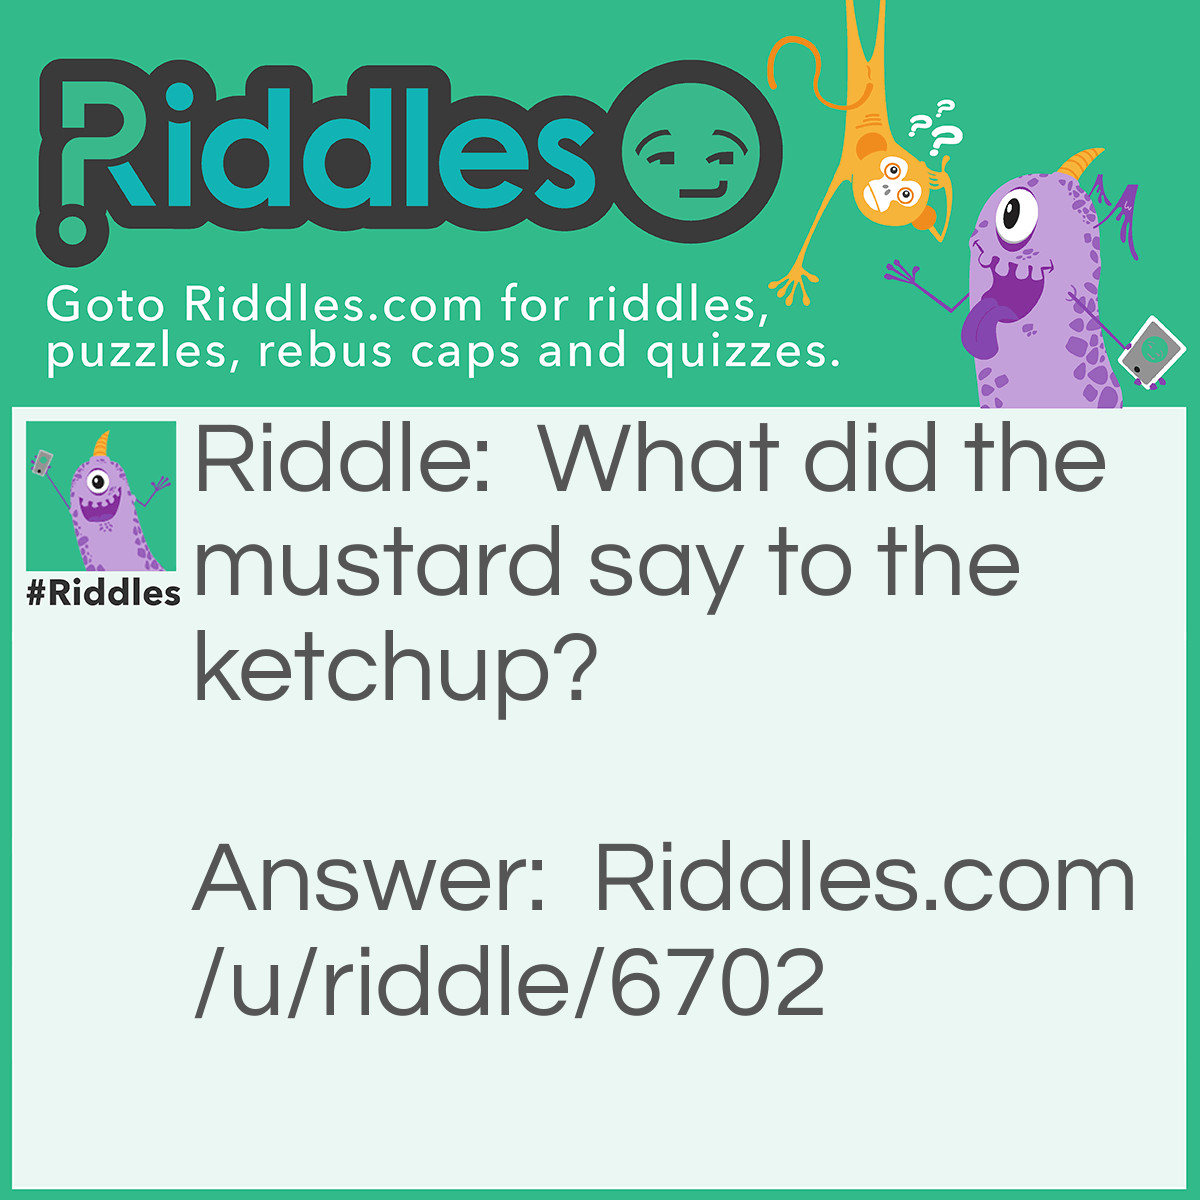 Riddle: What did the mustard say to the ketchup? Answer: "Bro come on, you gotta ketchup".